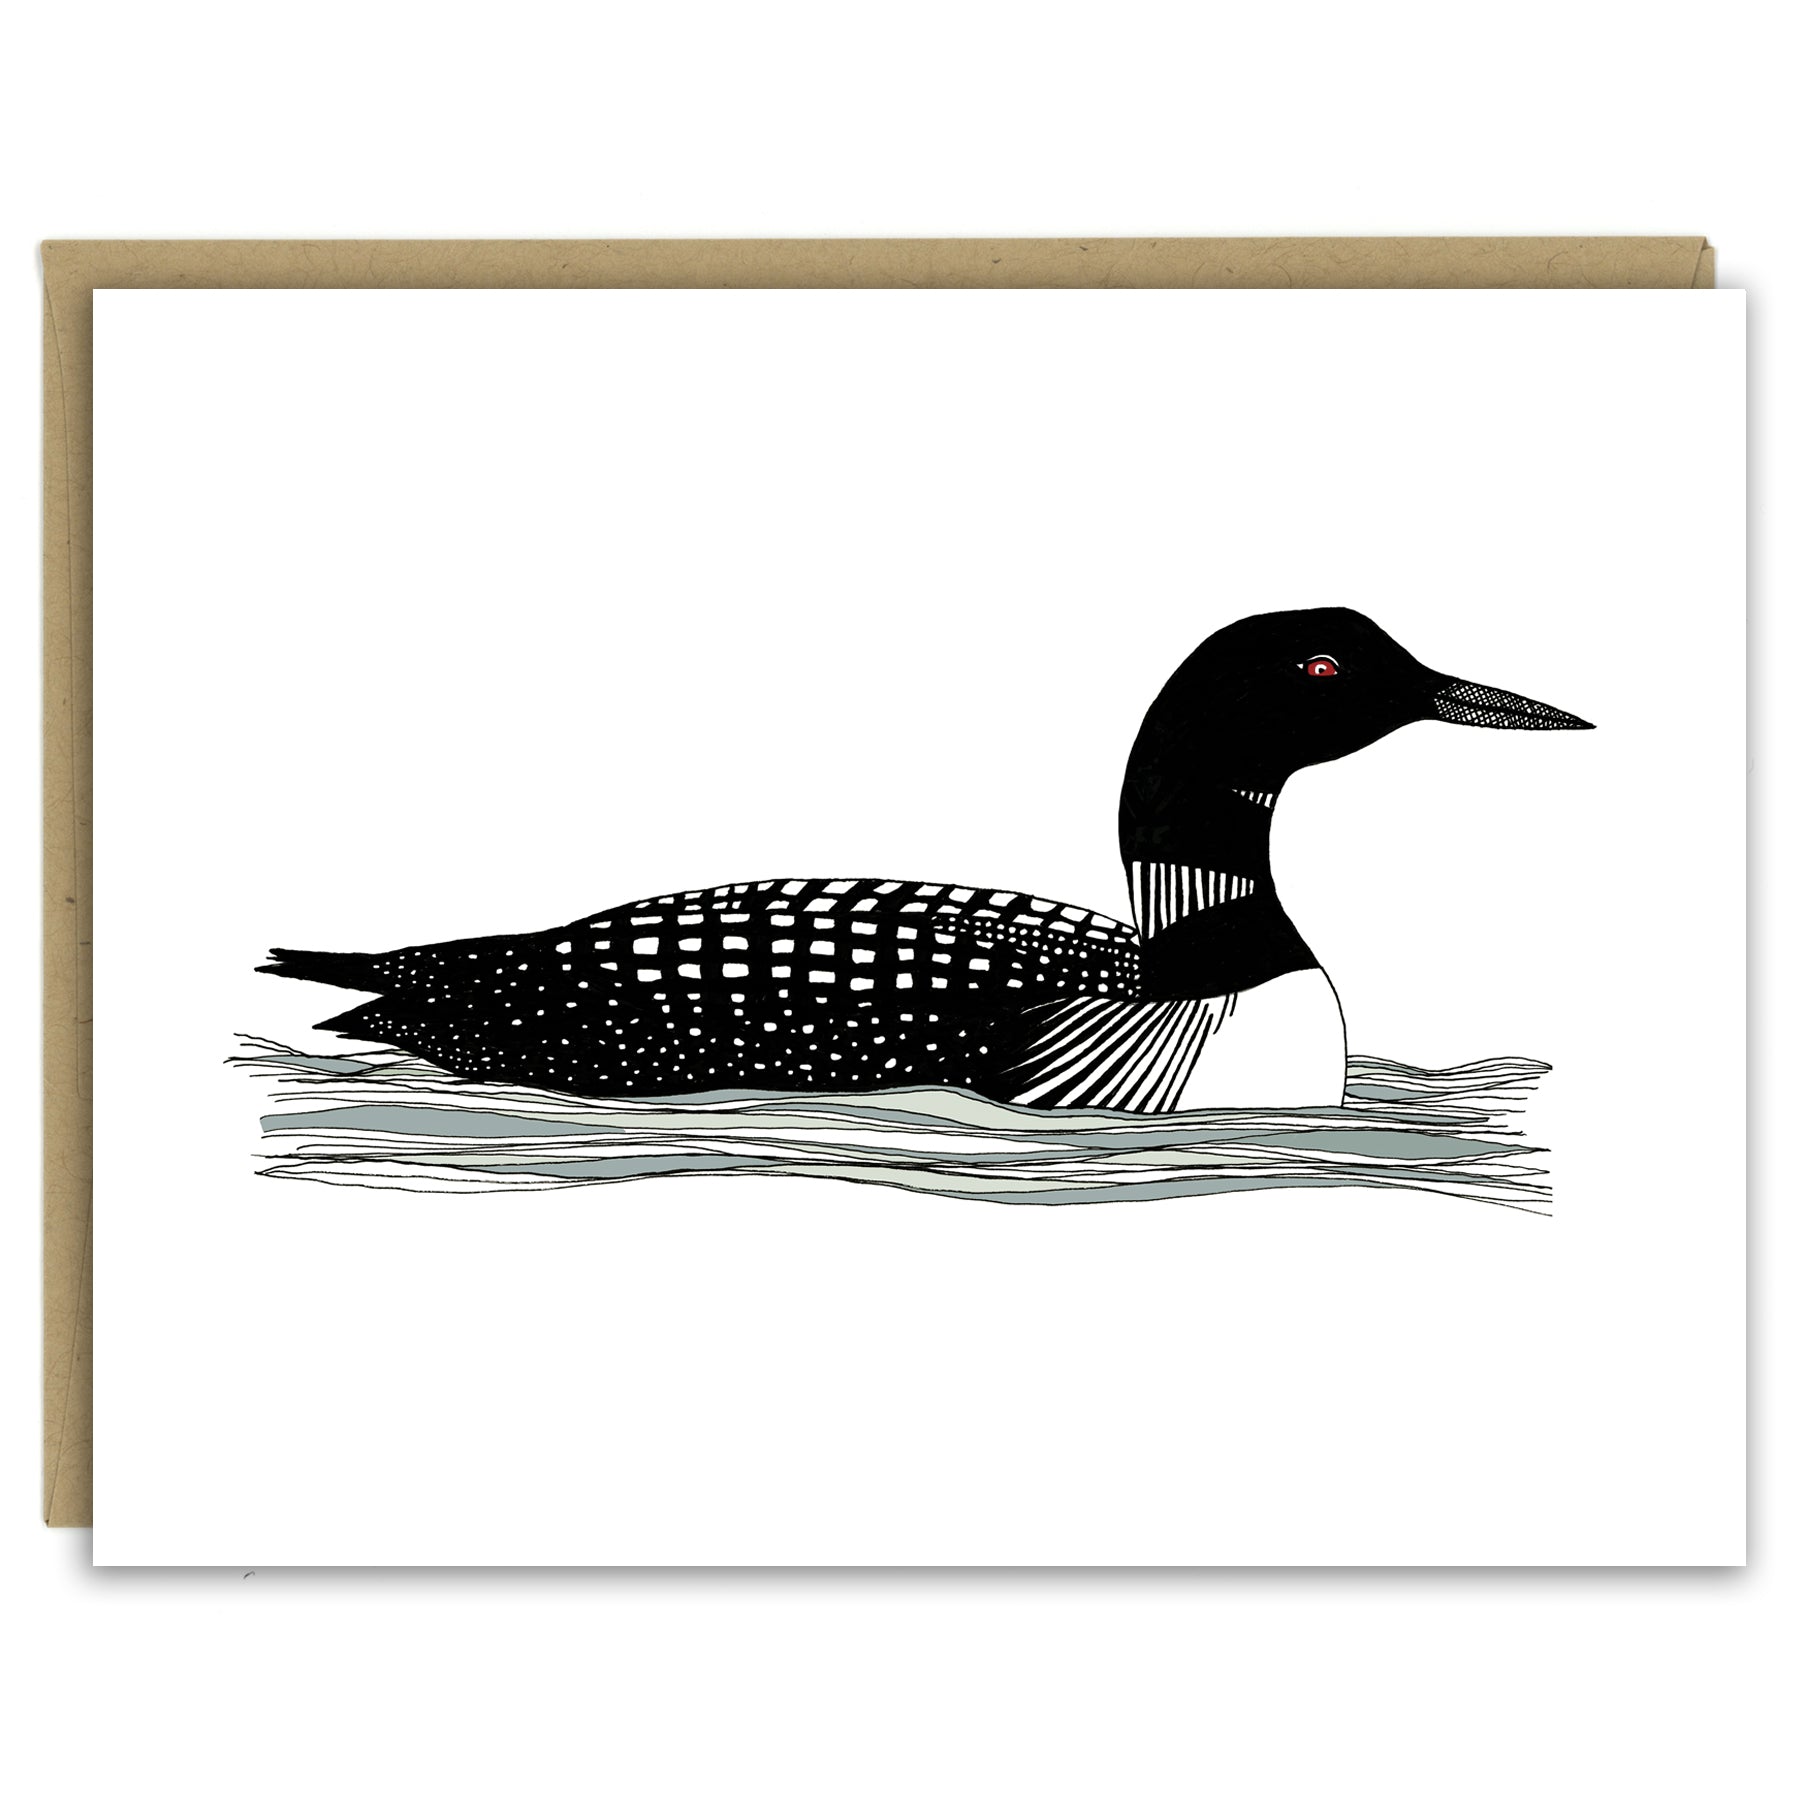 A greeting card showing a hand-drawn illustration of a black and white loon with its signature red eye, floating gently on the waves. Shown with a Kraft paper envelope on a white background. 